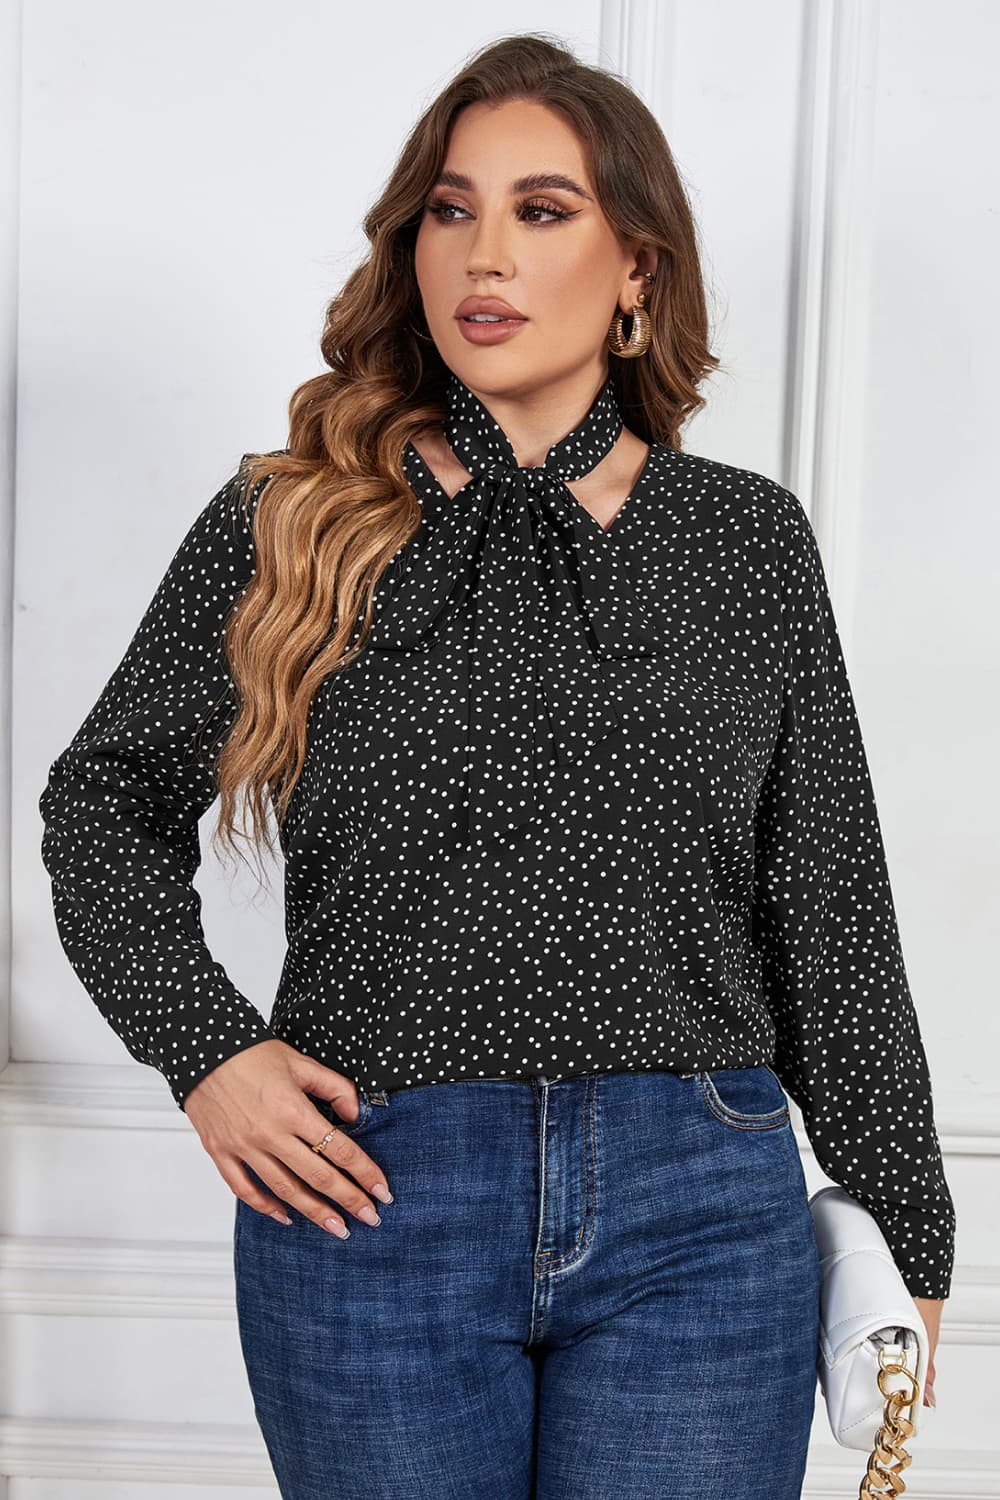 Melo Apparel Printed Tie Neck Long Sleeve Blouse